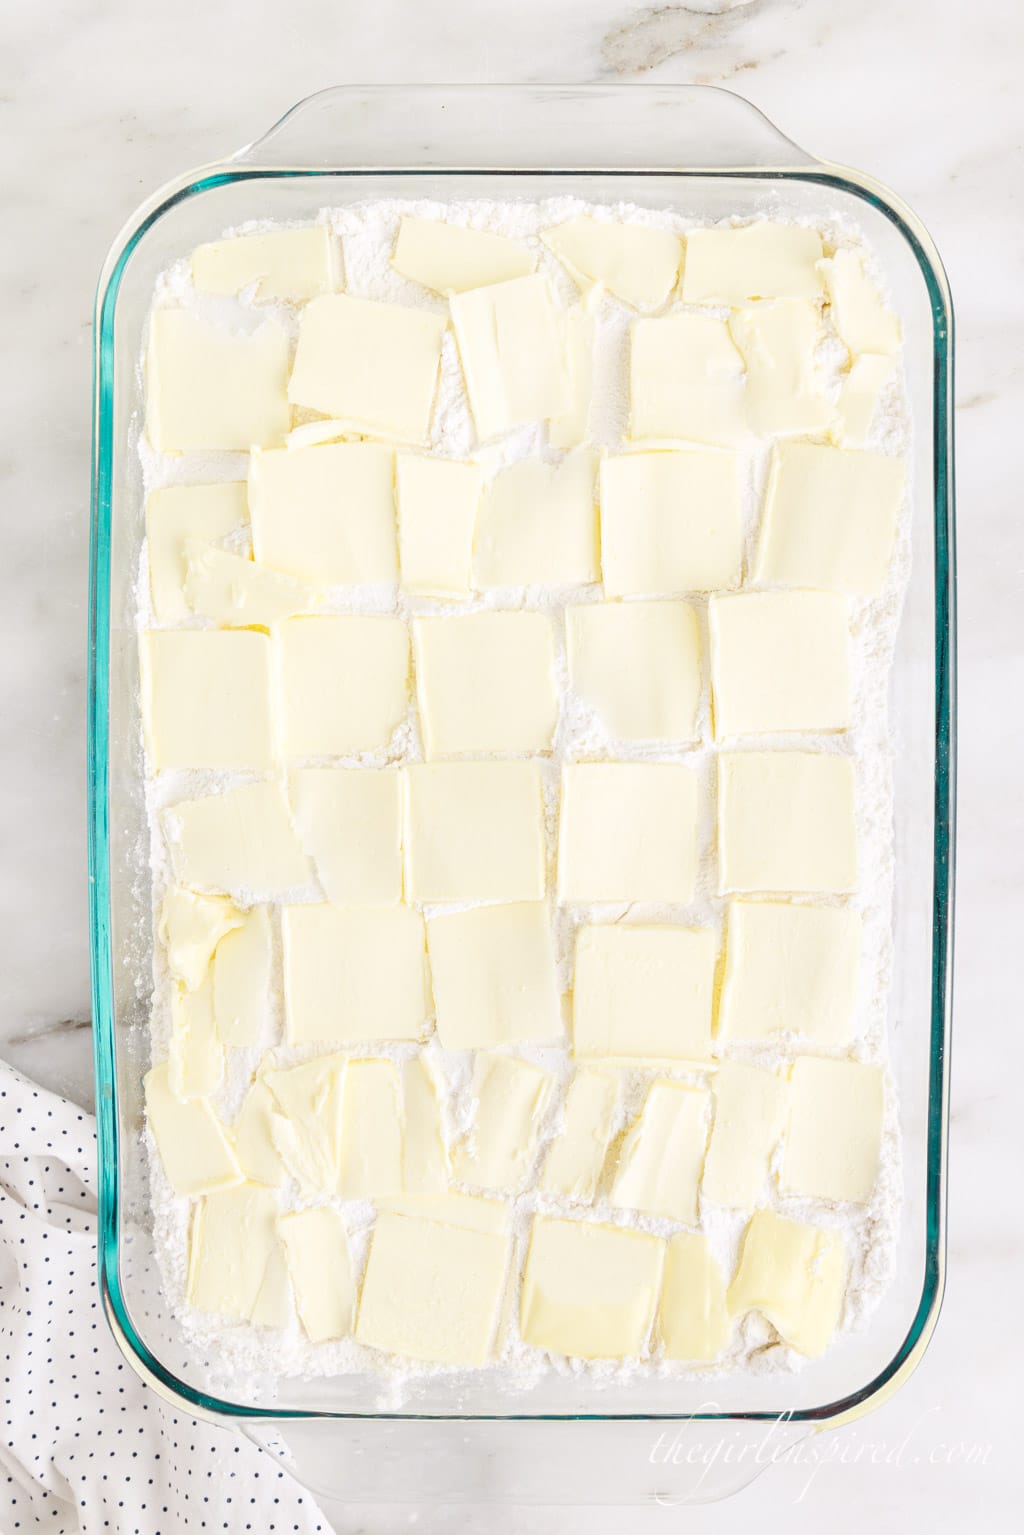 Thin pats of butter added to the top of the dump cake layers in the glass baking dish atop a white marble surface with a white cloth in the bottom left corner